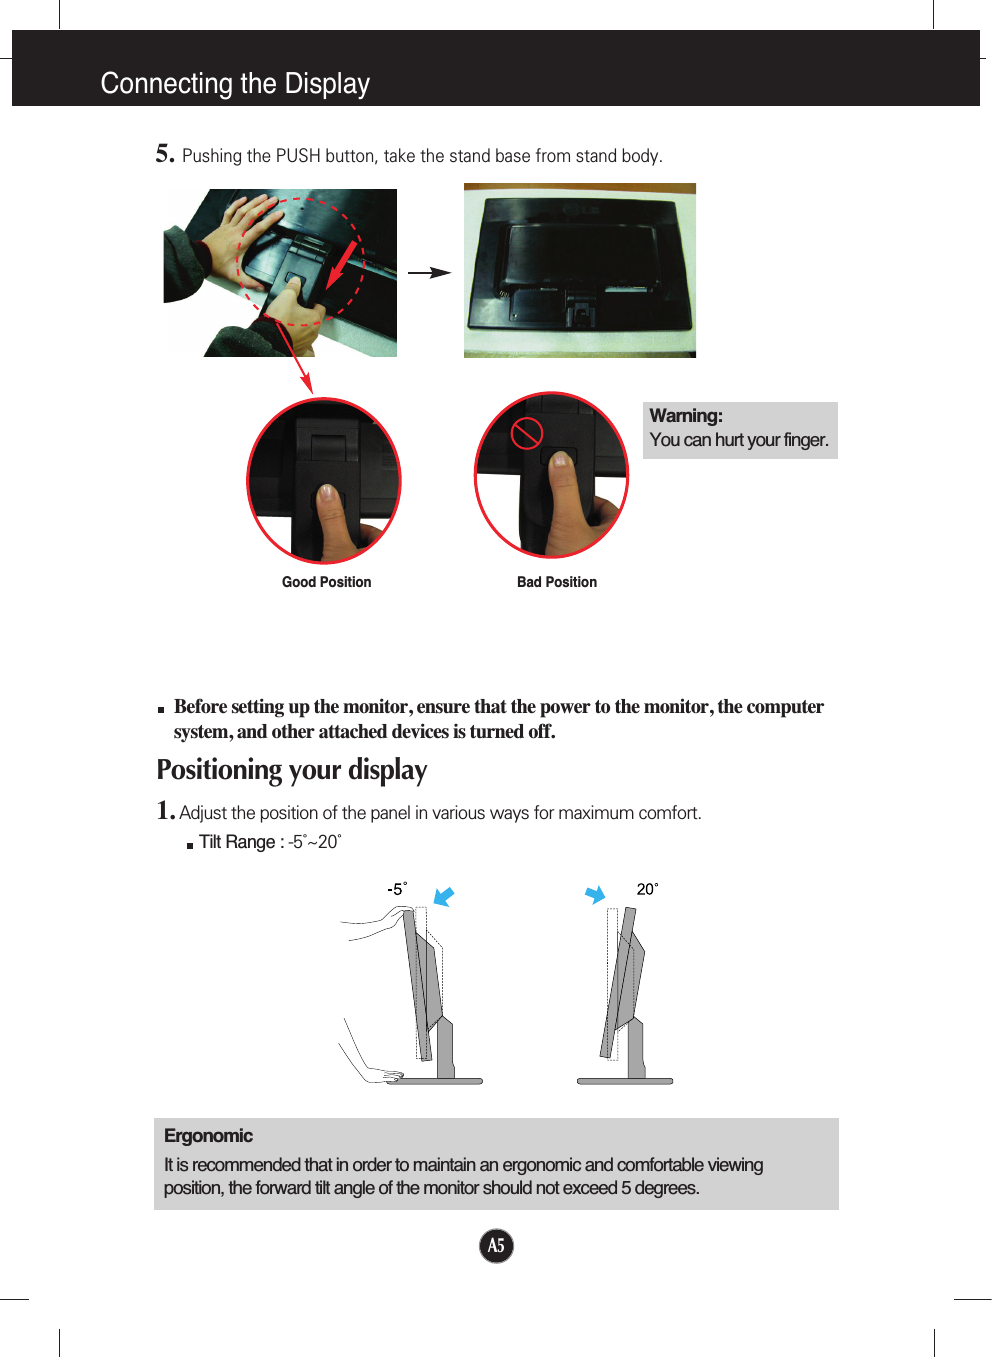 A5Connecting the DisplayBefore setting up the monitor, ensure that the power to the monitor, the computersystem, and other attached devices is turned off. Positioning your display1. Adjust the position of the panel in various ways for maximum comfort.Tilt Range : -5˚~20˚                            ErgonomicIt is recommended that in order to maintain an ergonomic and comfortable viewingposition, the forward tilt angle of the monitor should not exceed 5 degrees.5.Pushing the PUSH button, take the stand base from stand body.Good Position Bad PositionWarning:You can hurt your finger.